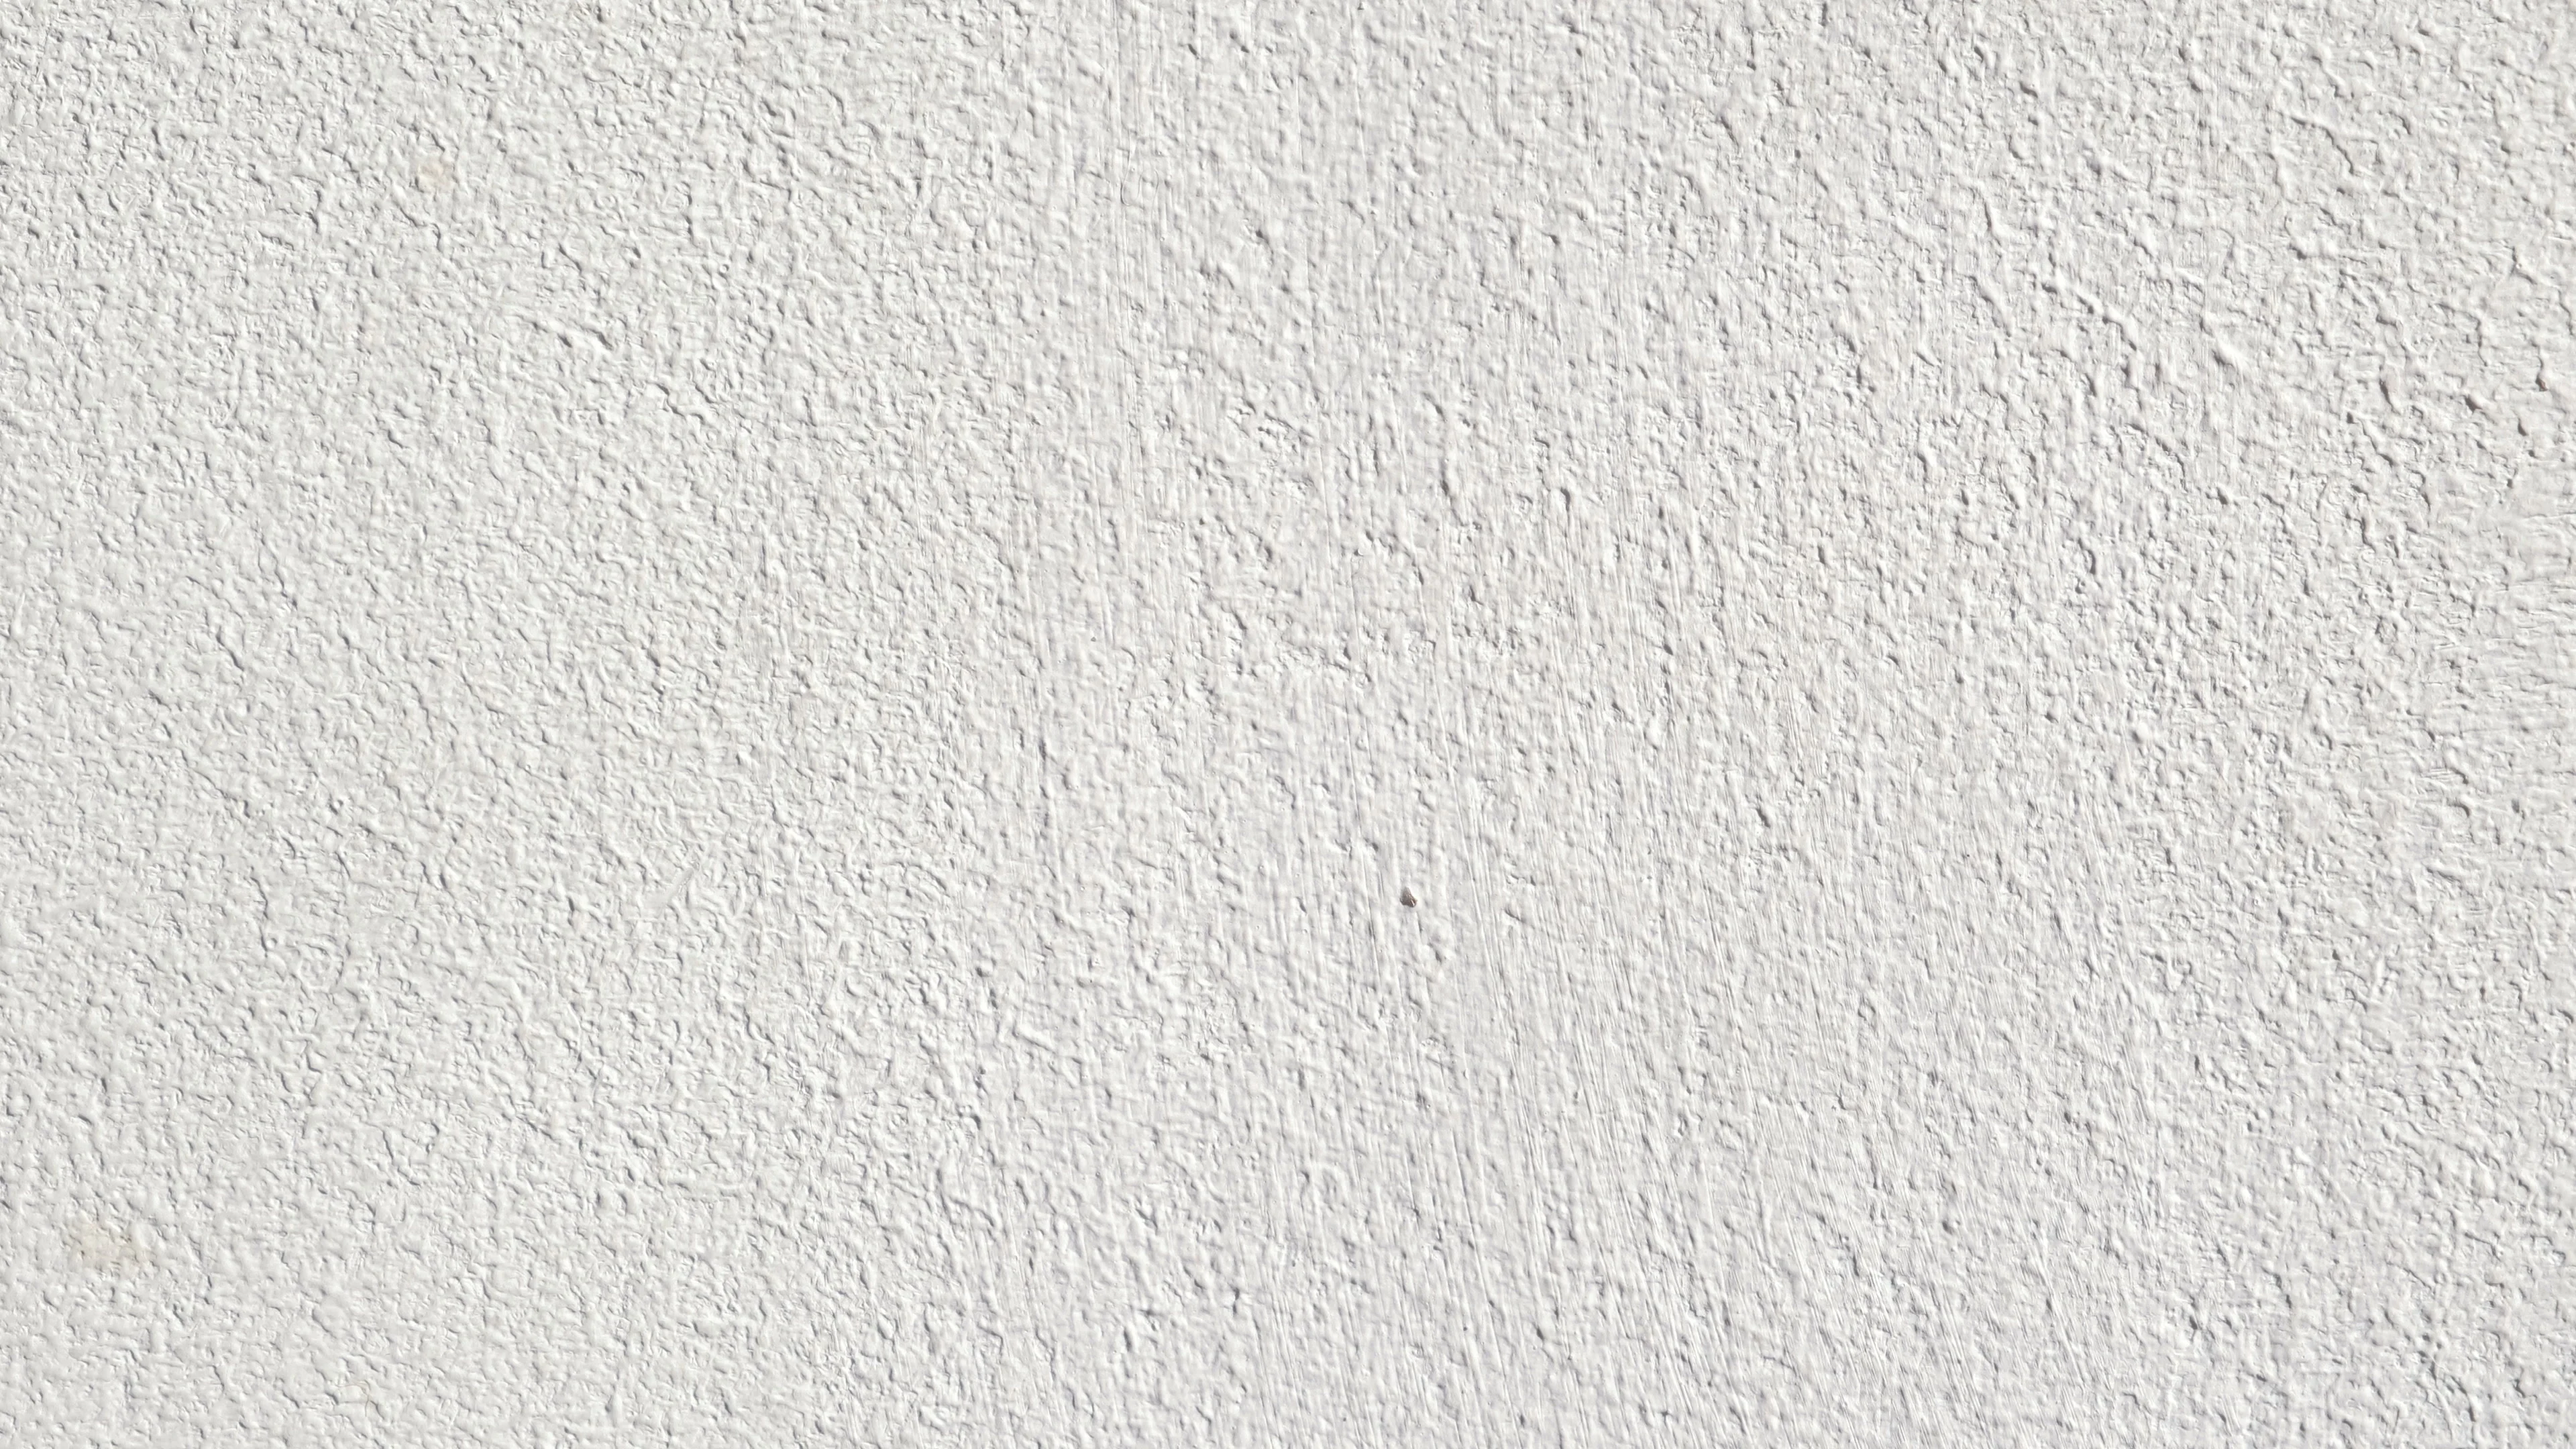 White Paint Wall Texture Footage 087370725 Prevstill 